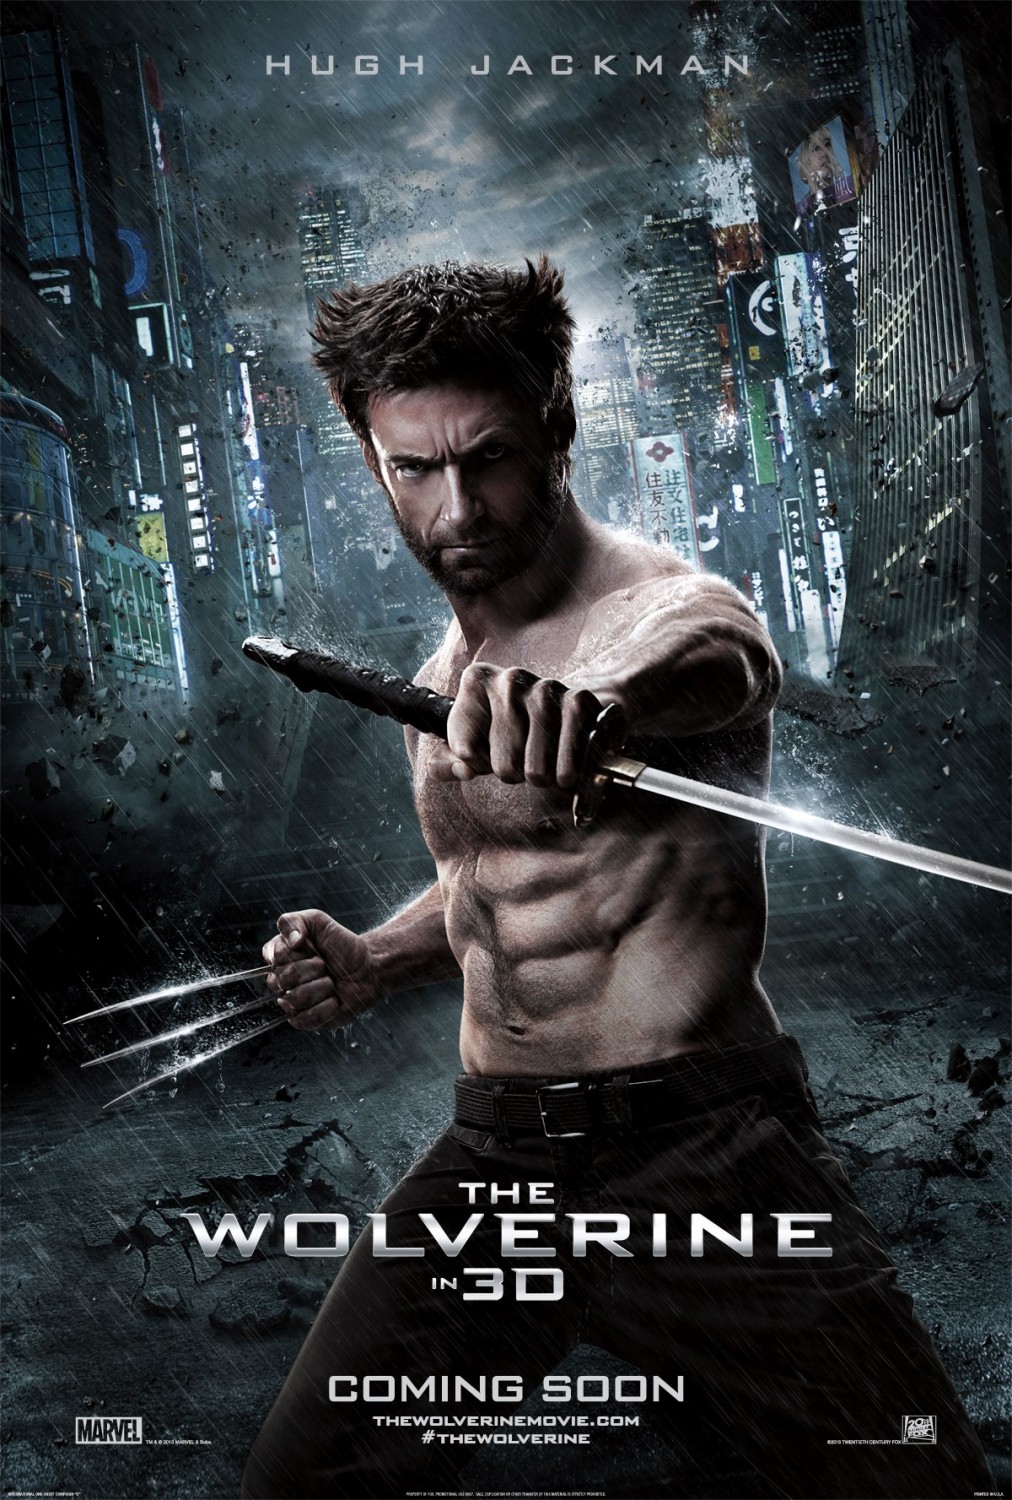 THE WOLVERINE  - 2013 - James Mangold The-Wolverine-Poster-+